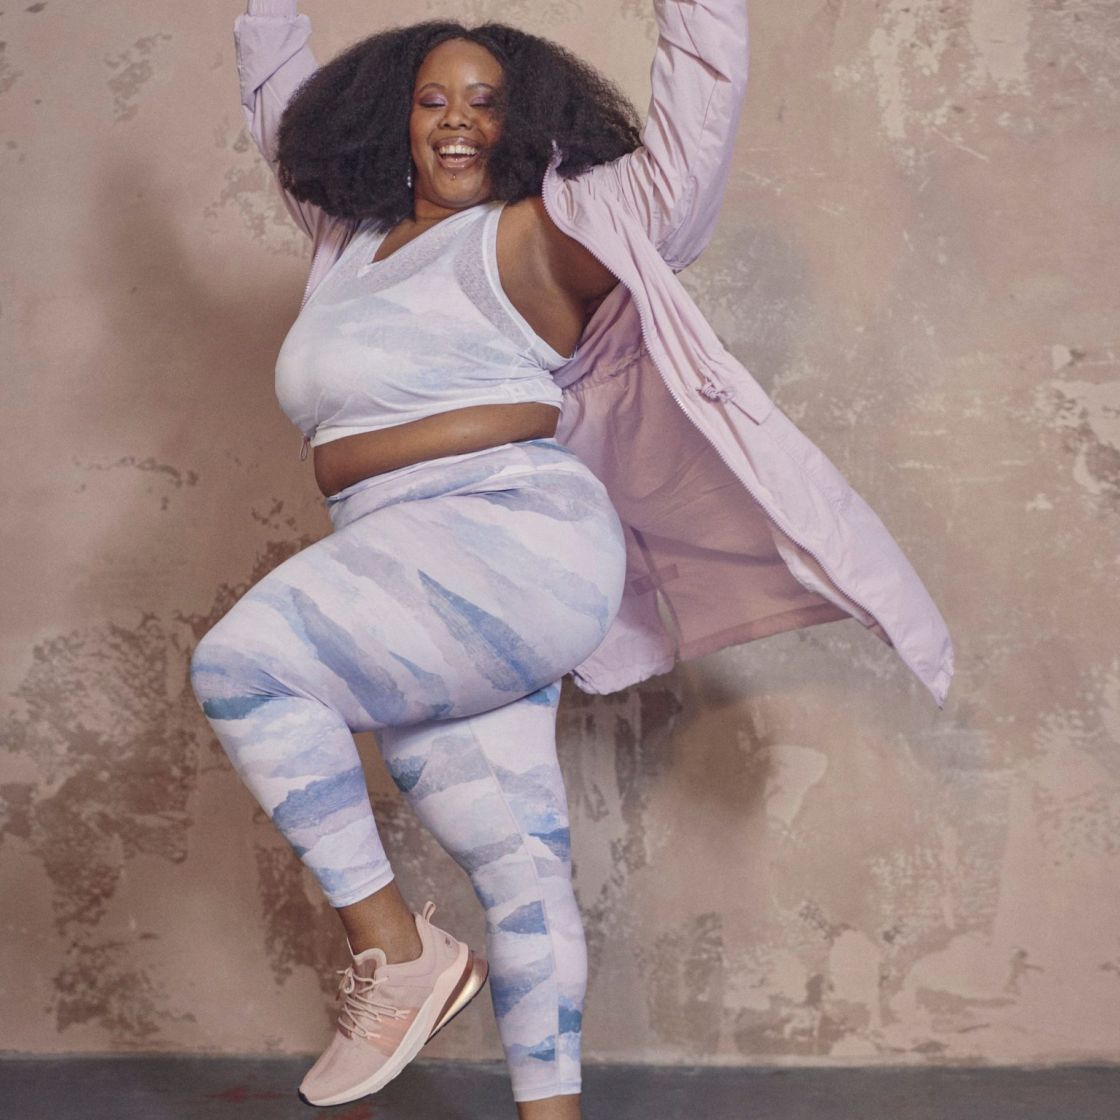 Plus-size fitness: how women navigate fitness in bigger bodies